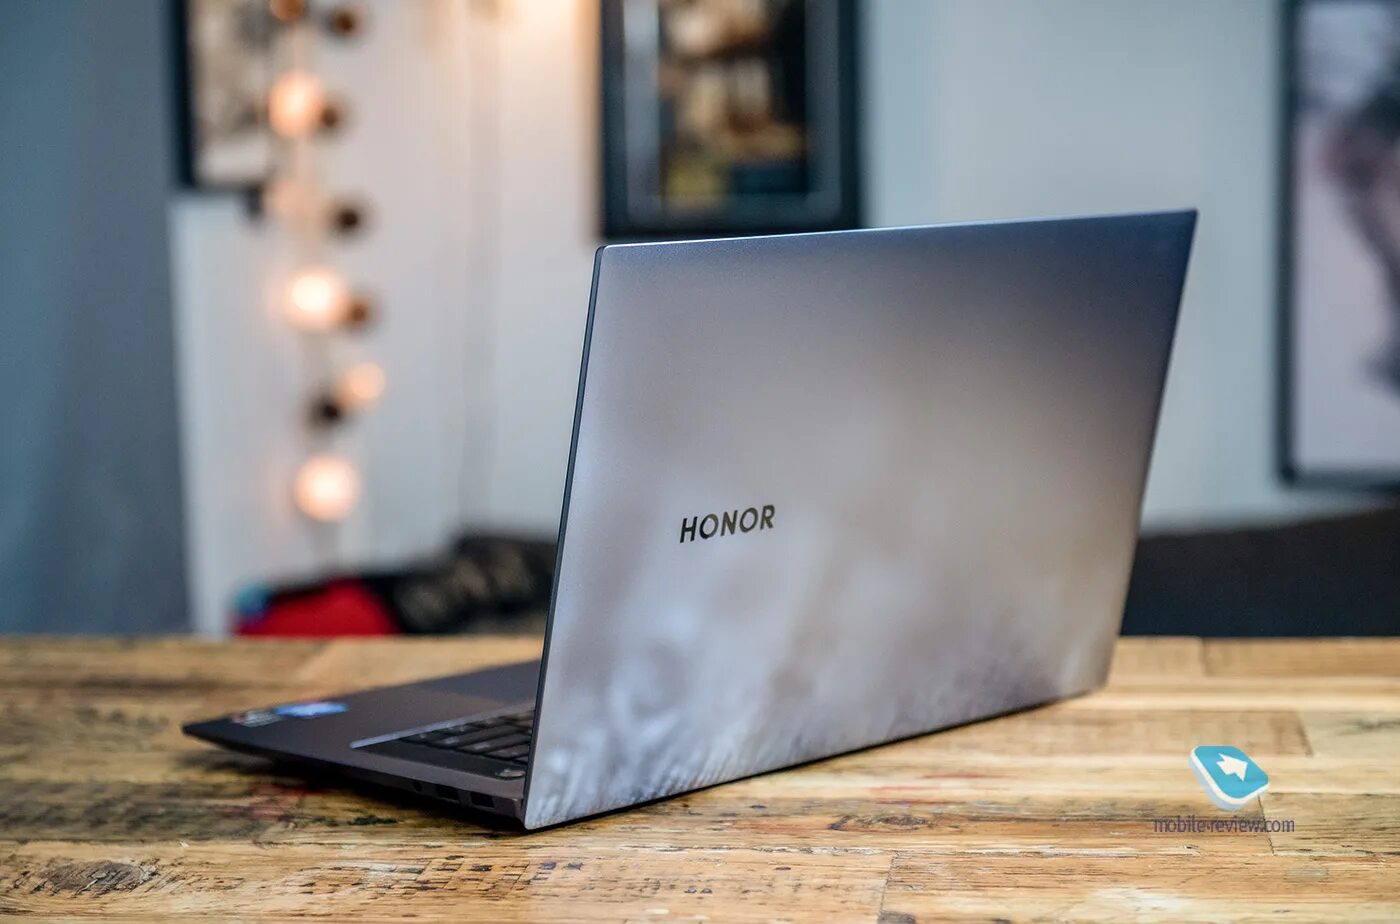 Honor MAGICBOOK Pro 16.1. Honor MAGICBOOK 16. Ноутбук Honor MAGICBOOK 16. 16.1" Ноутбук Honor MAGICBOOK Pro.